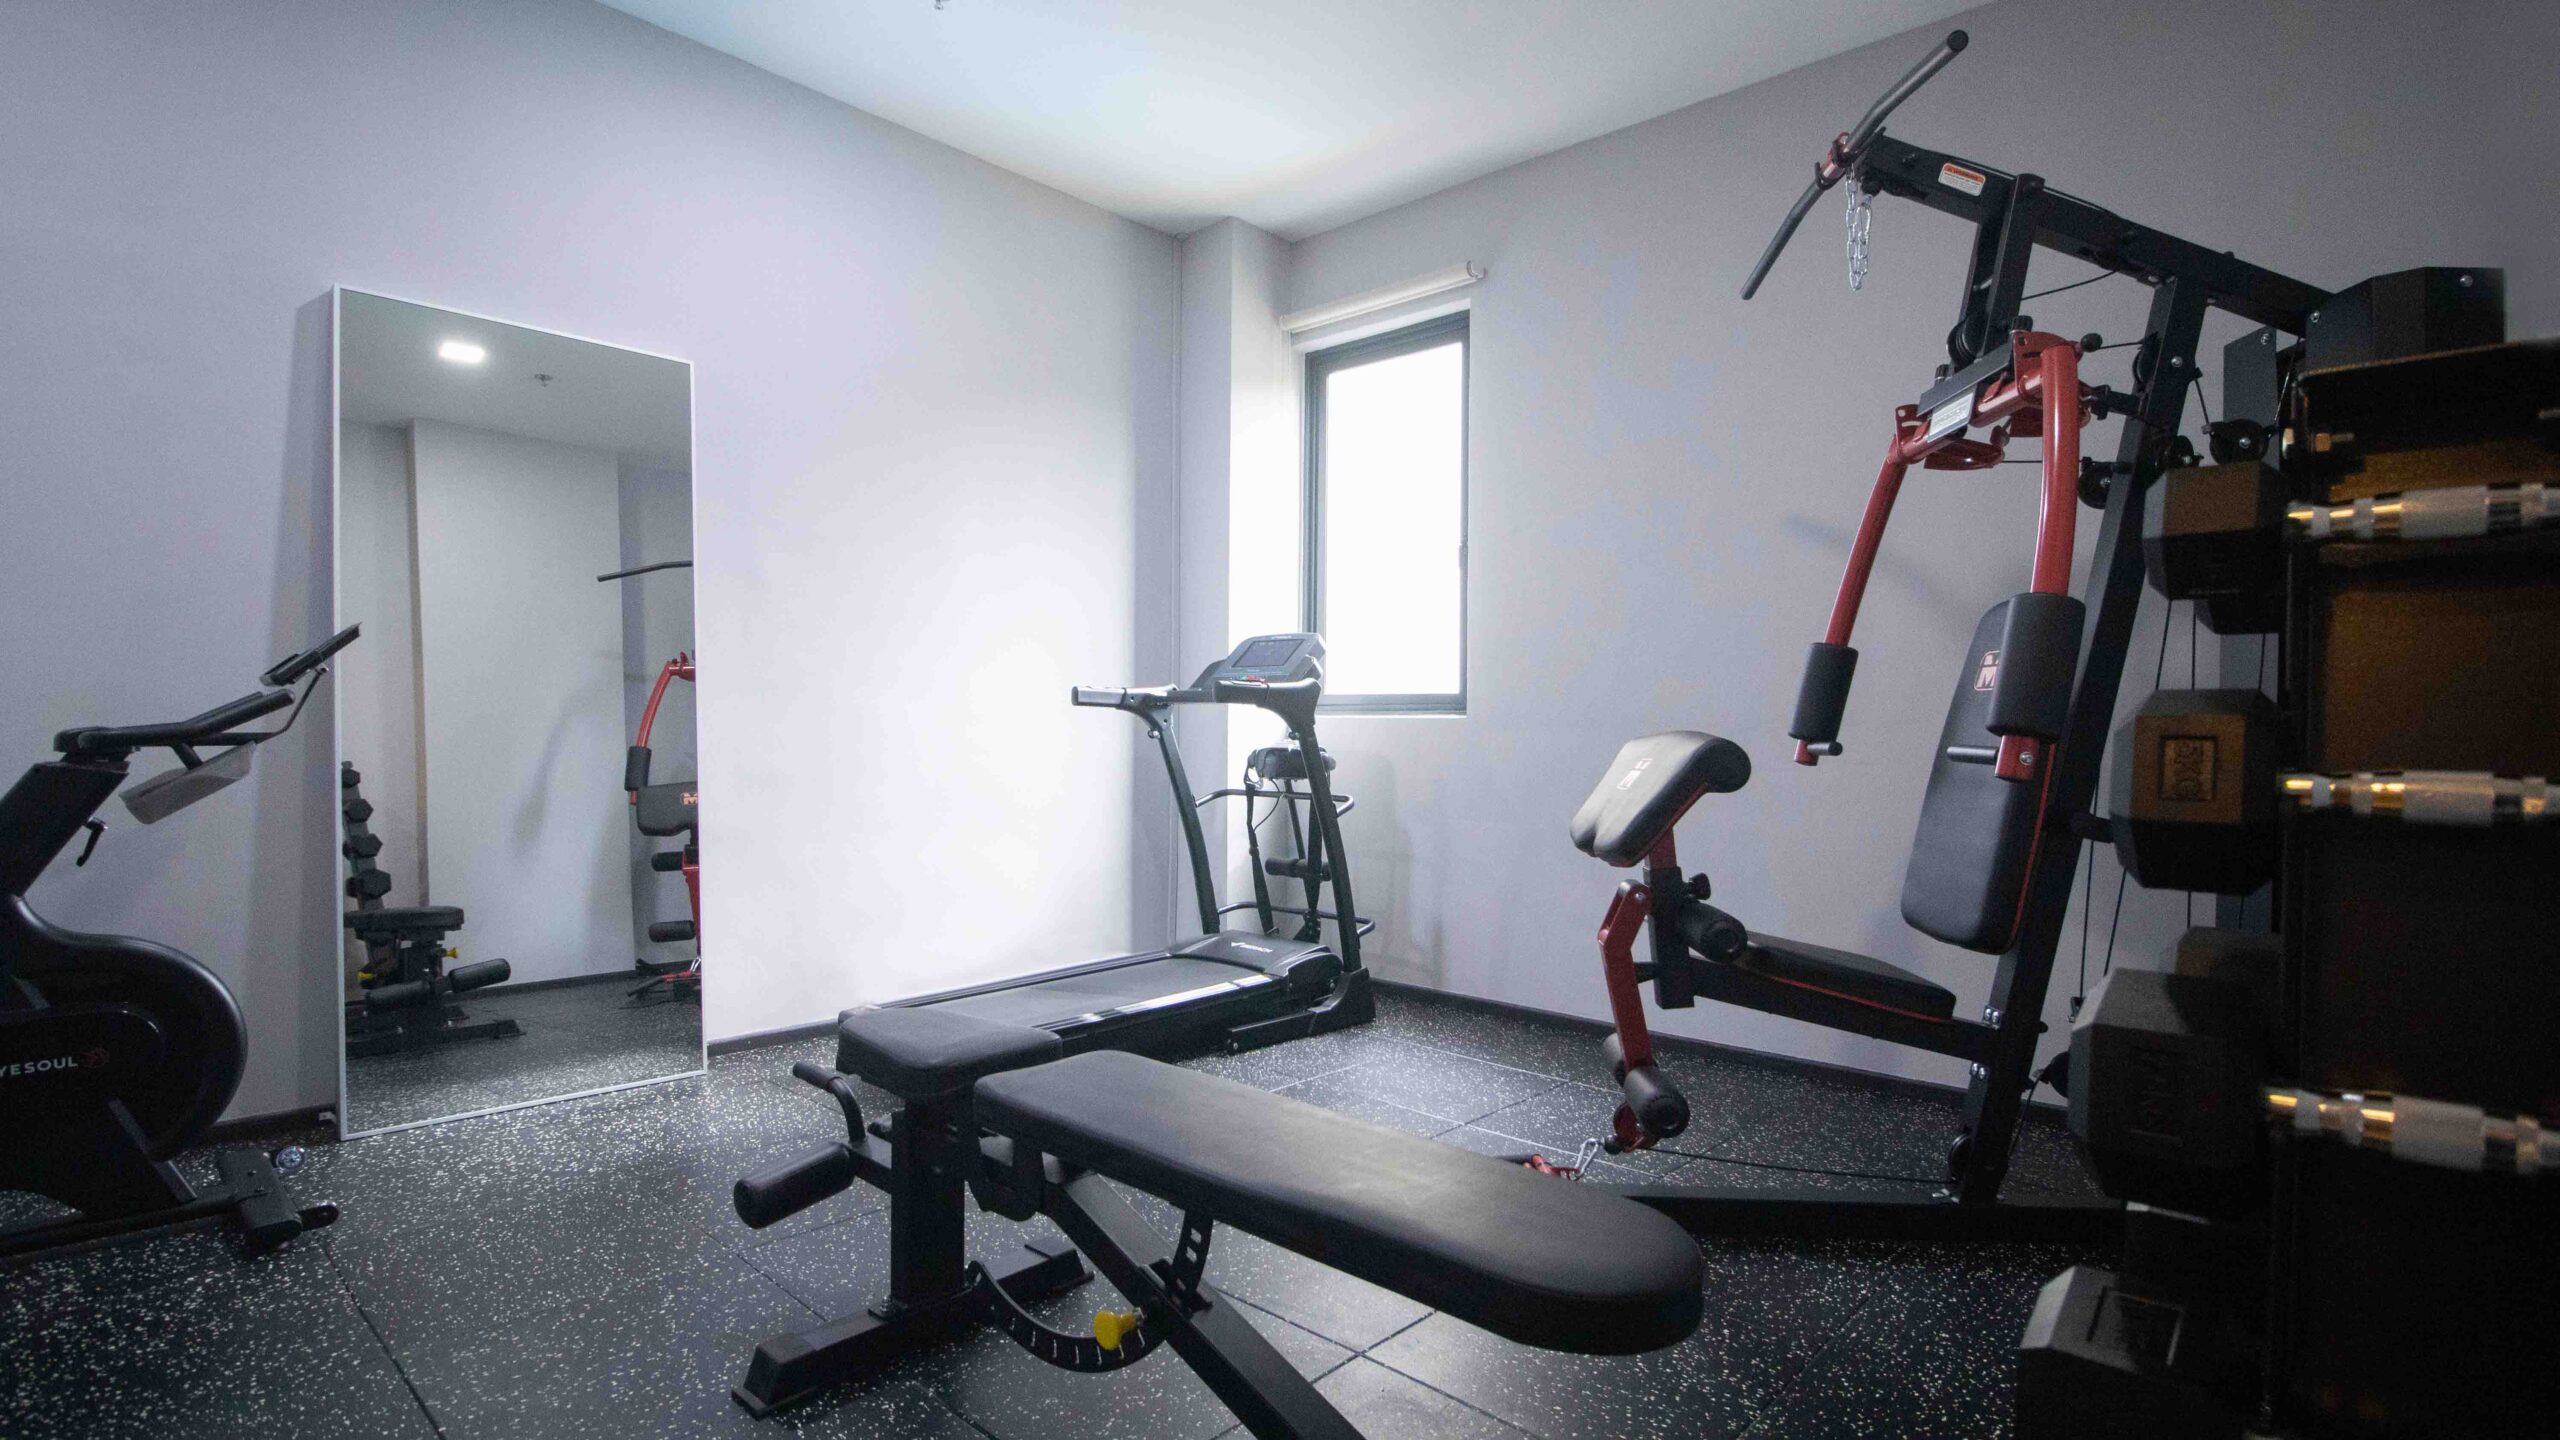 Gym at LK Residences with many equipment for use.